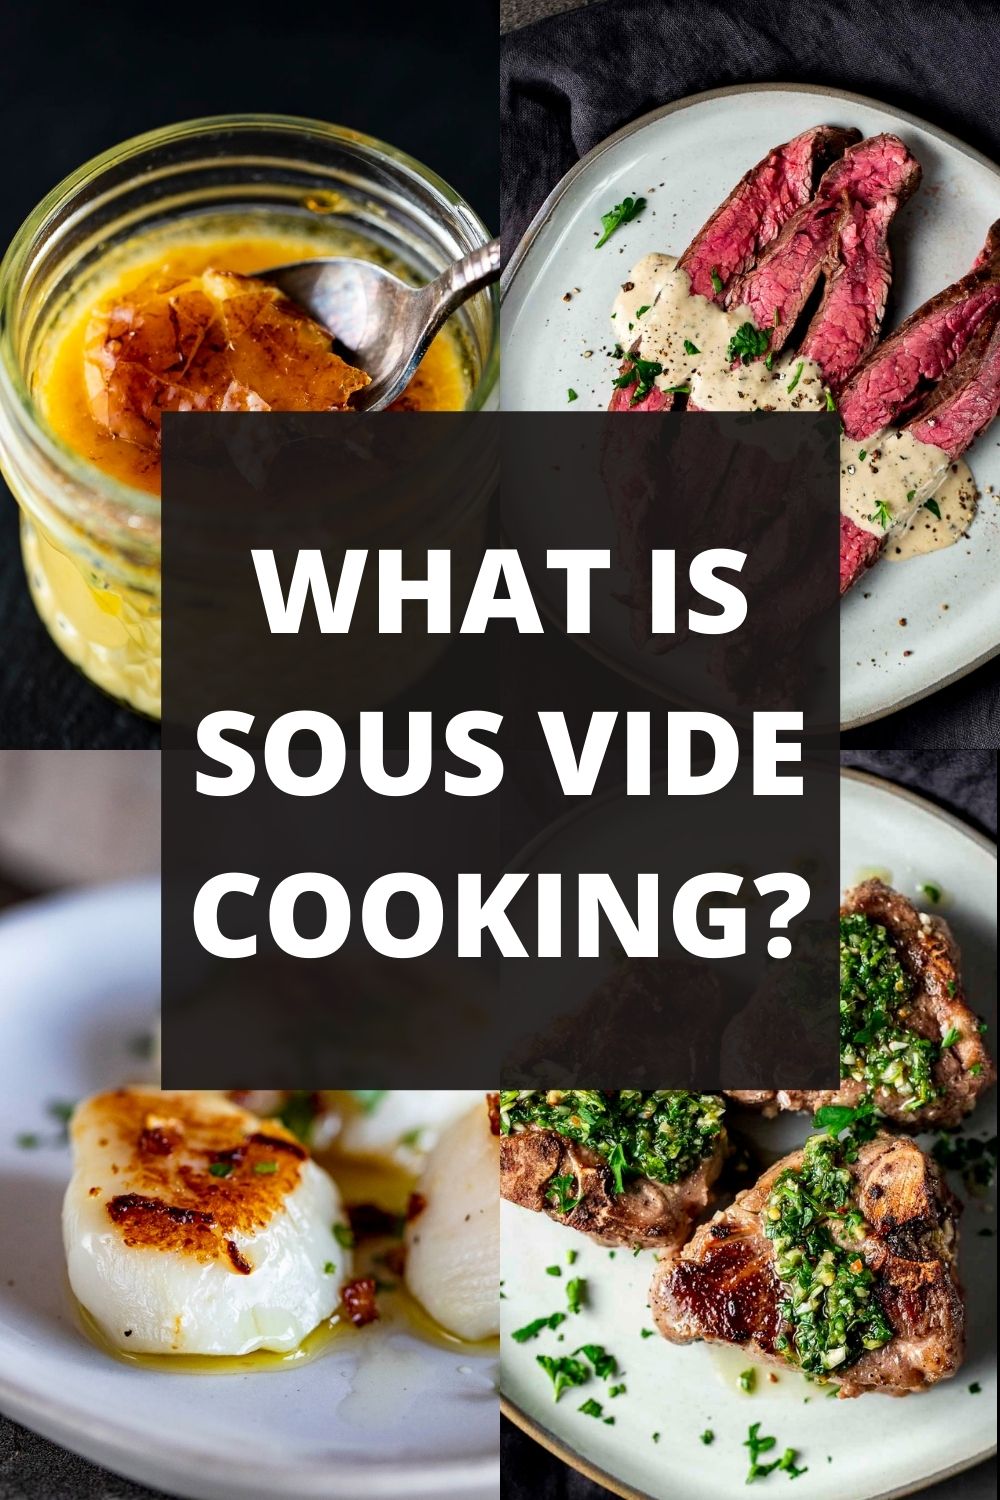 What is Sous Vide Cooking?